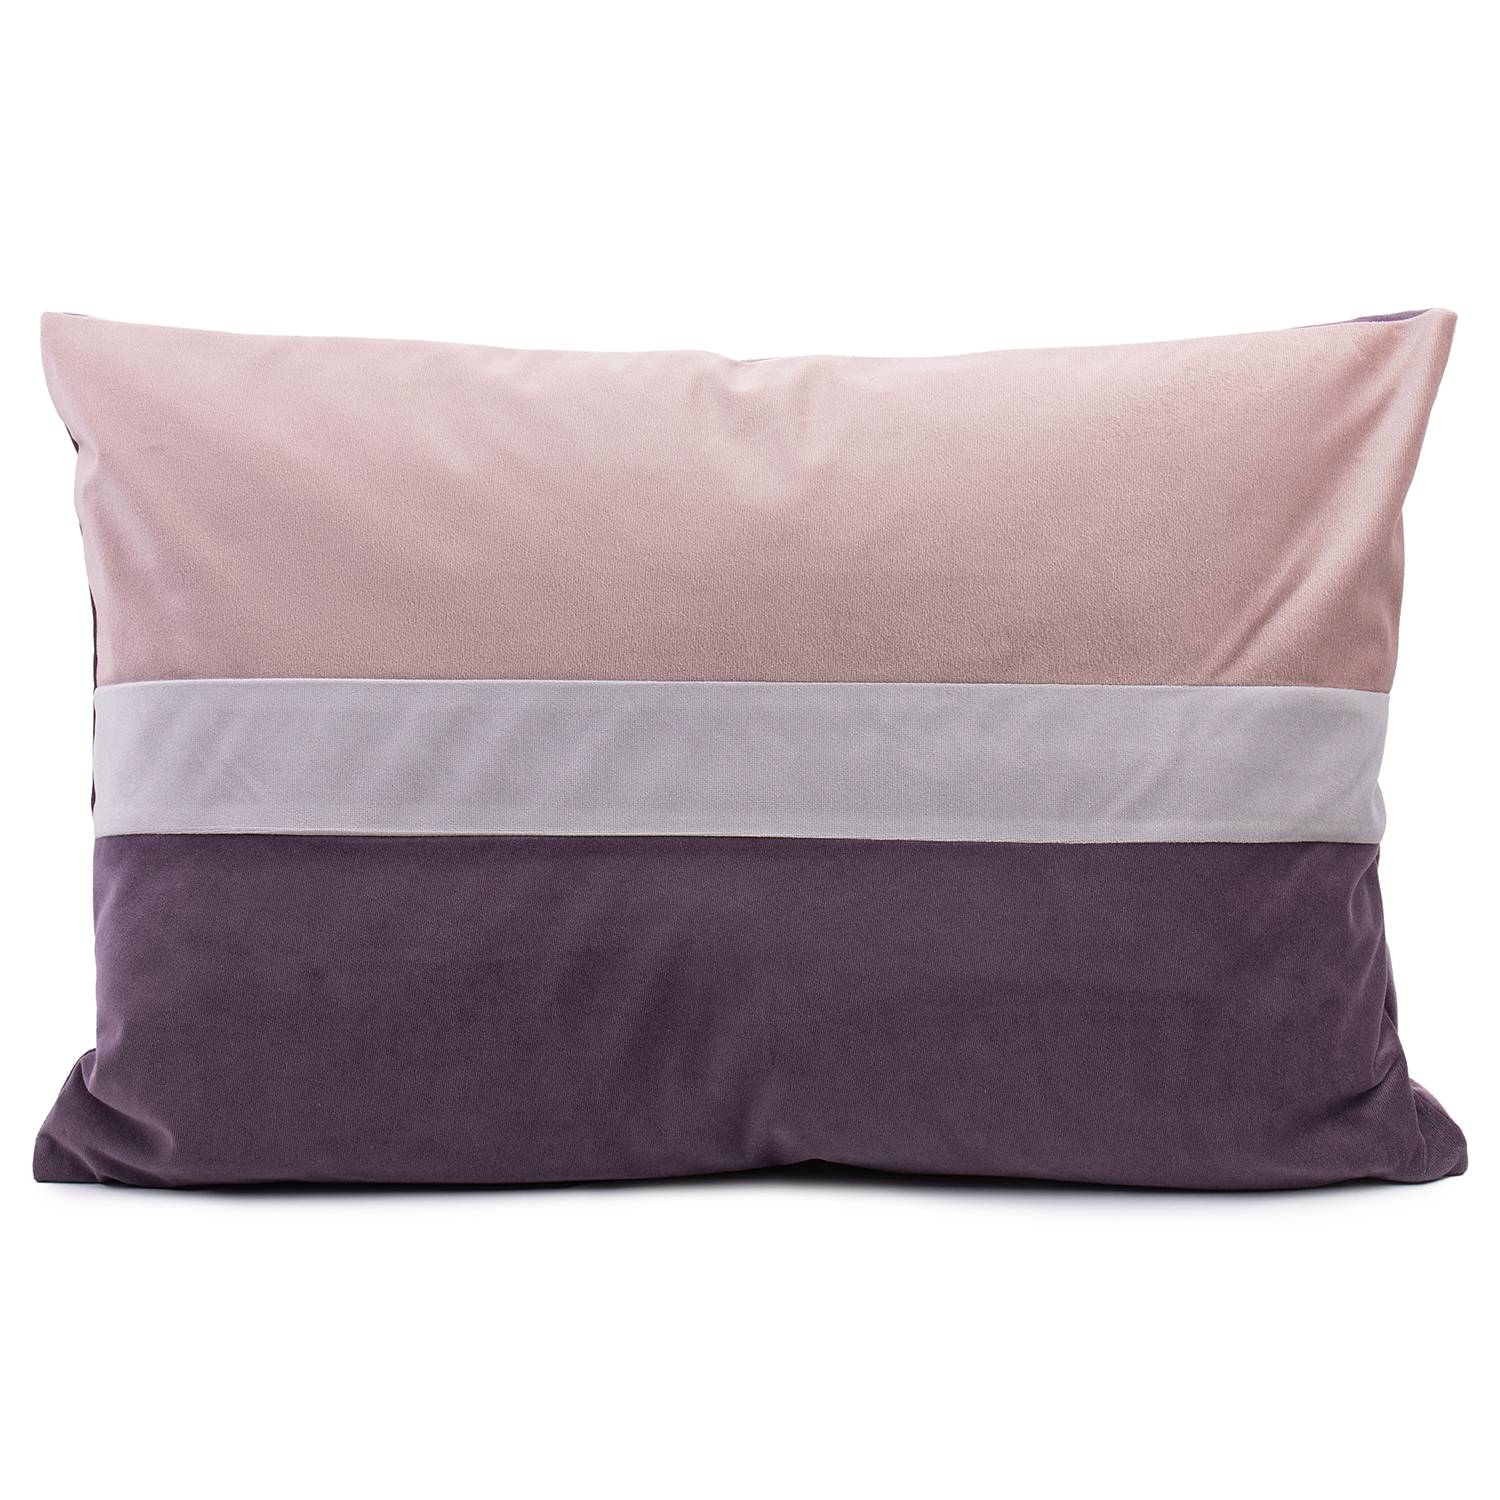 Image of Housse de coussin Pino 000000001000243552